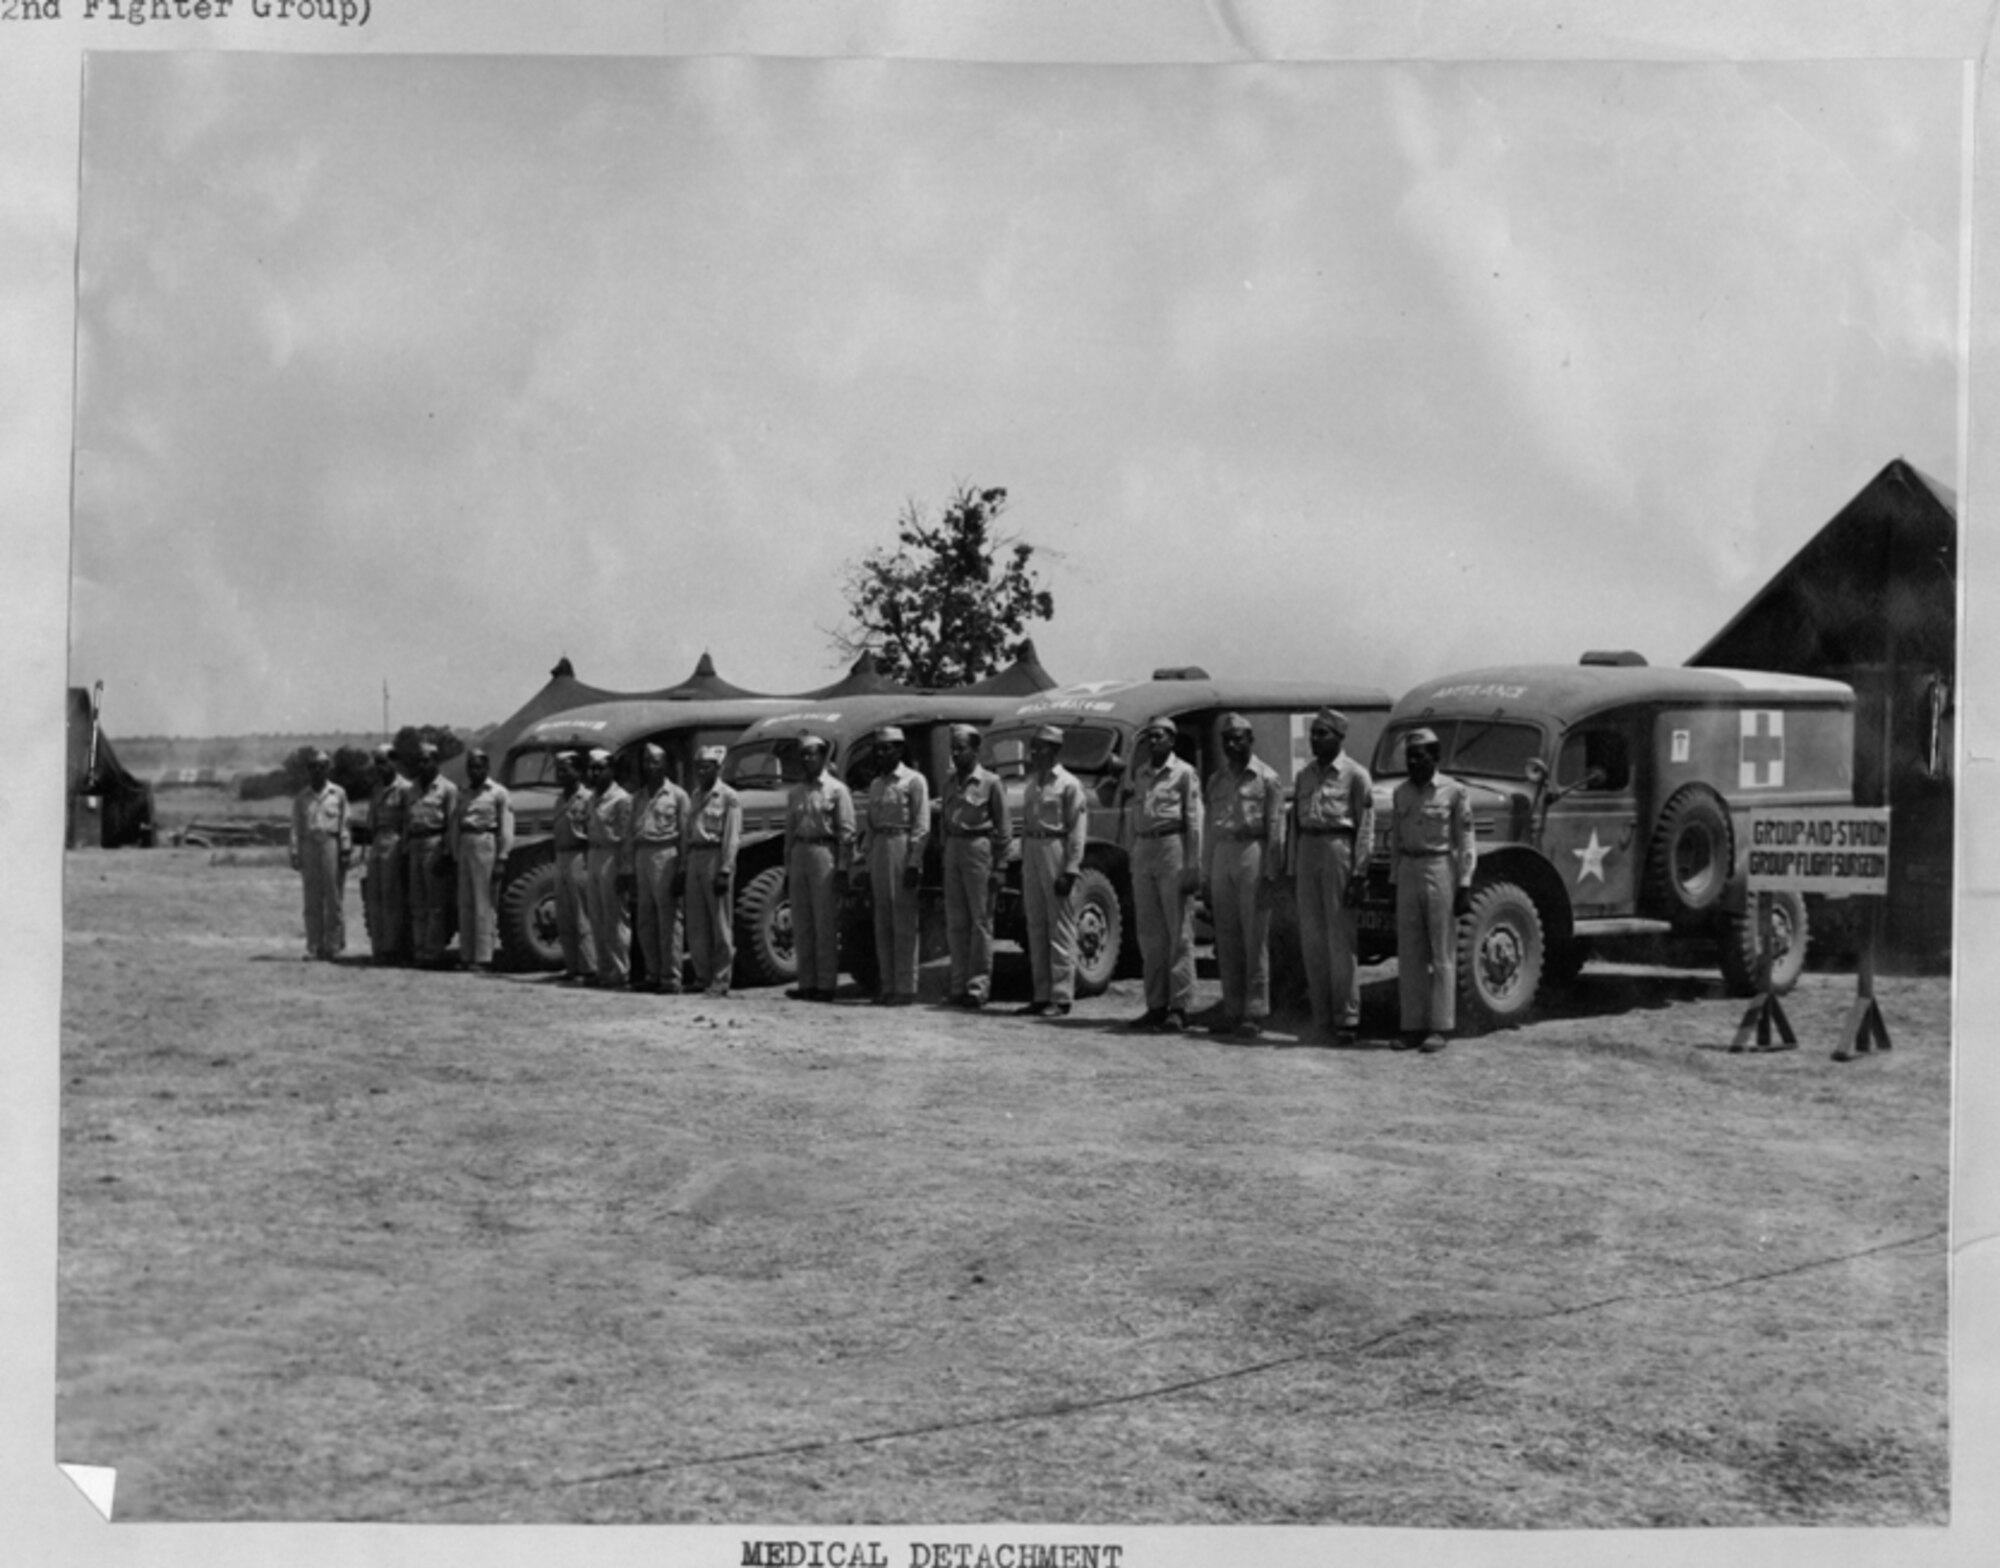 The 332nd Fighter Group Medical Detachment in 1944.